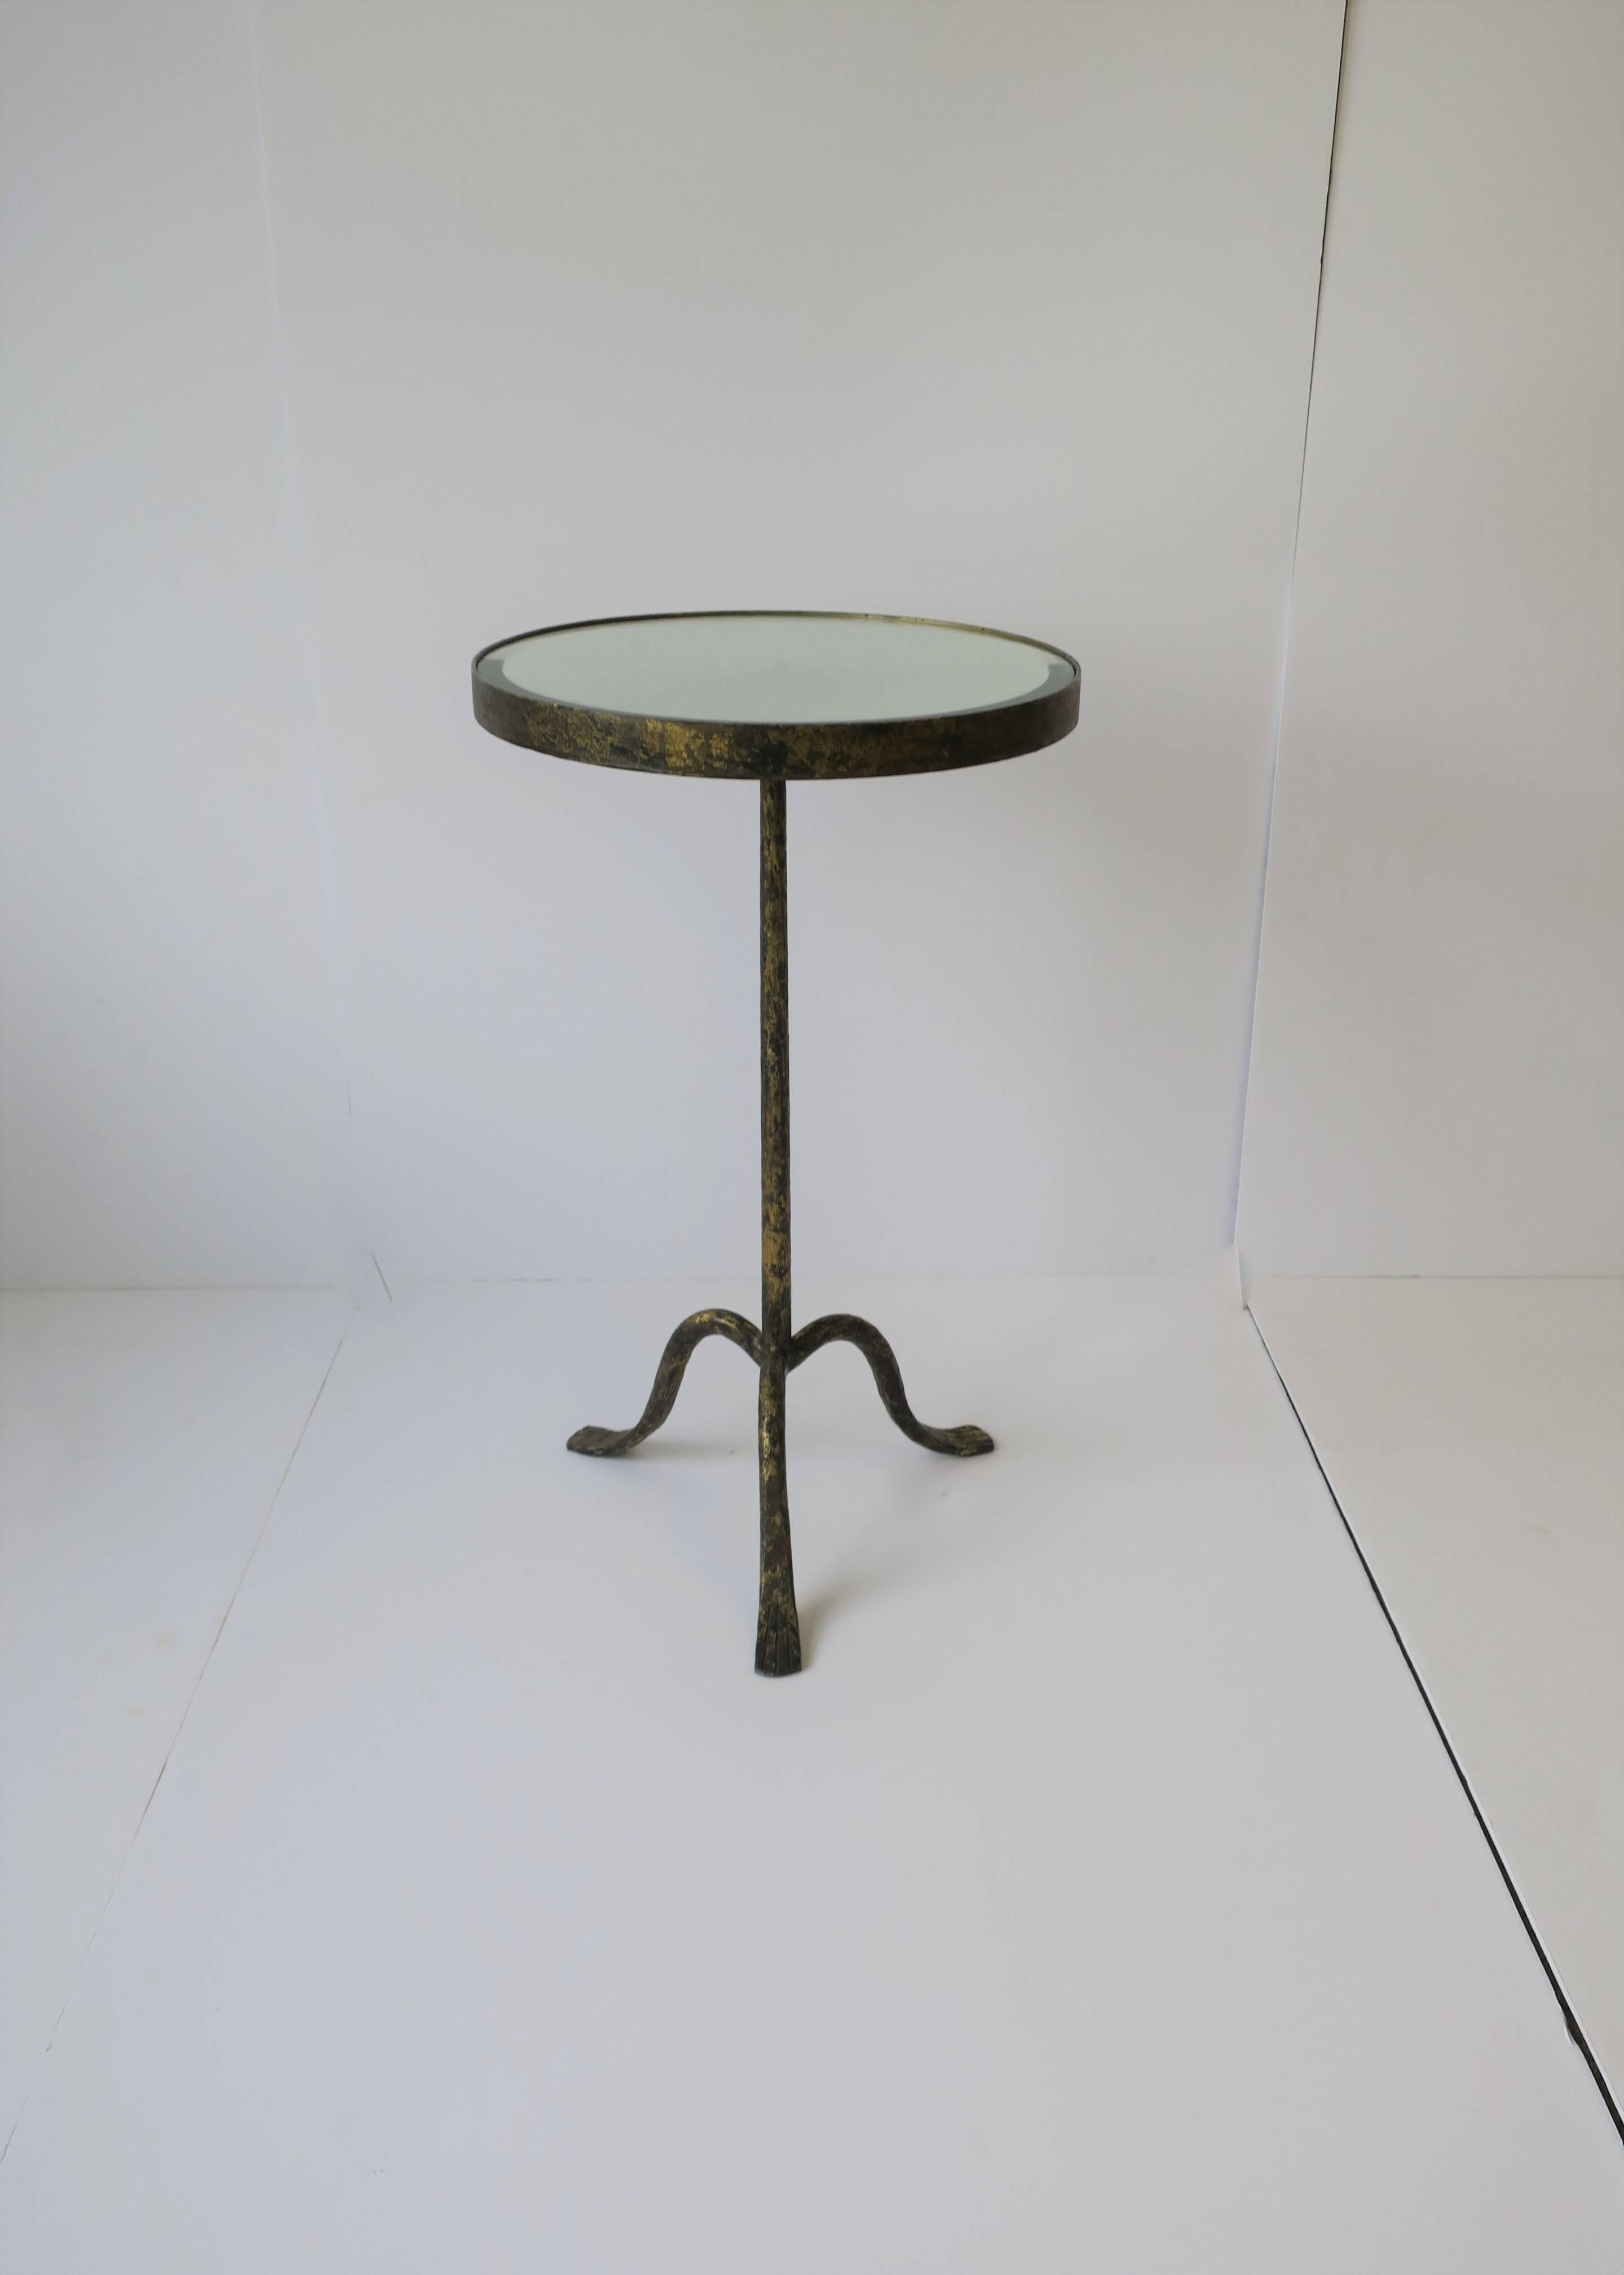 A beautiful gold gilt metal round Gueridon side or drinks table with mirrored glass top and tri-pod paw/leg base, circa 21st Century. 

Side table measures: 14